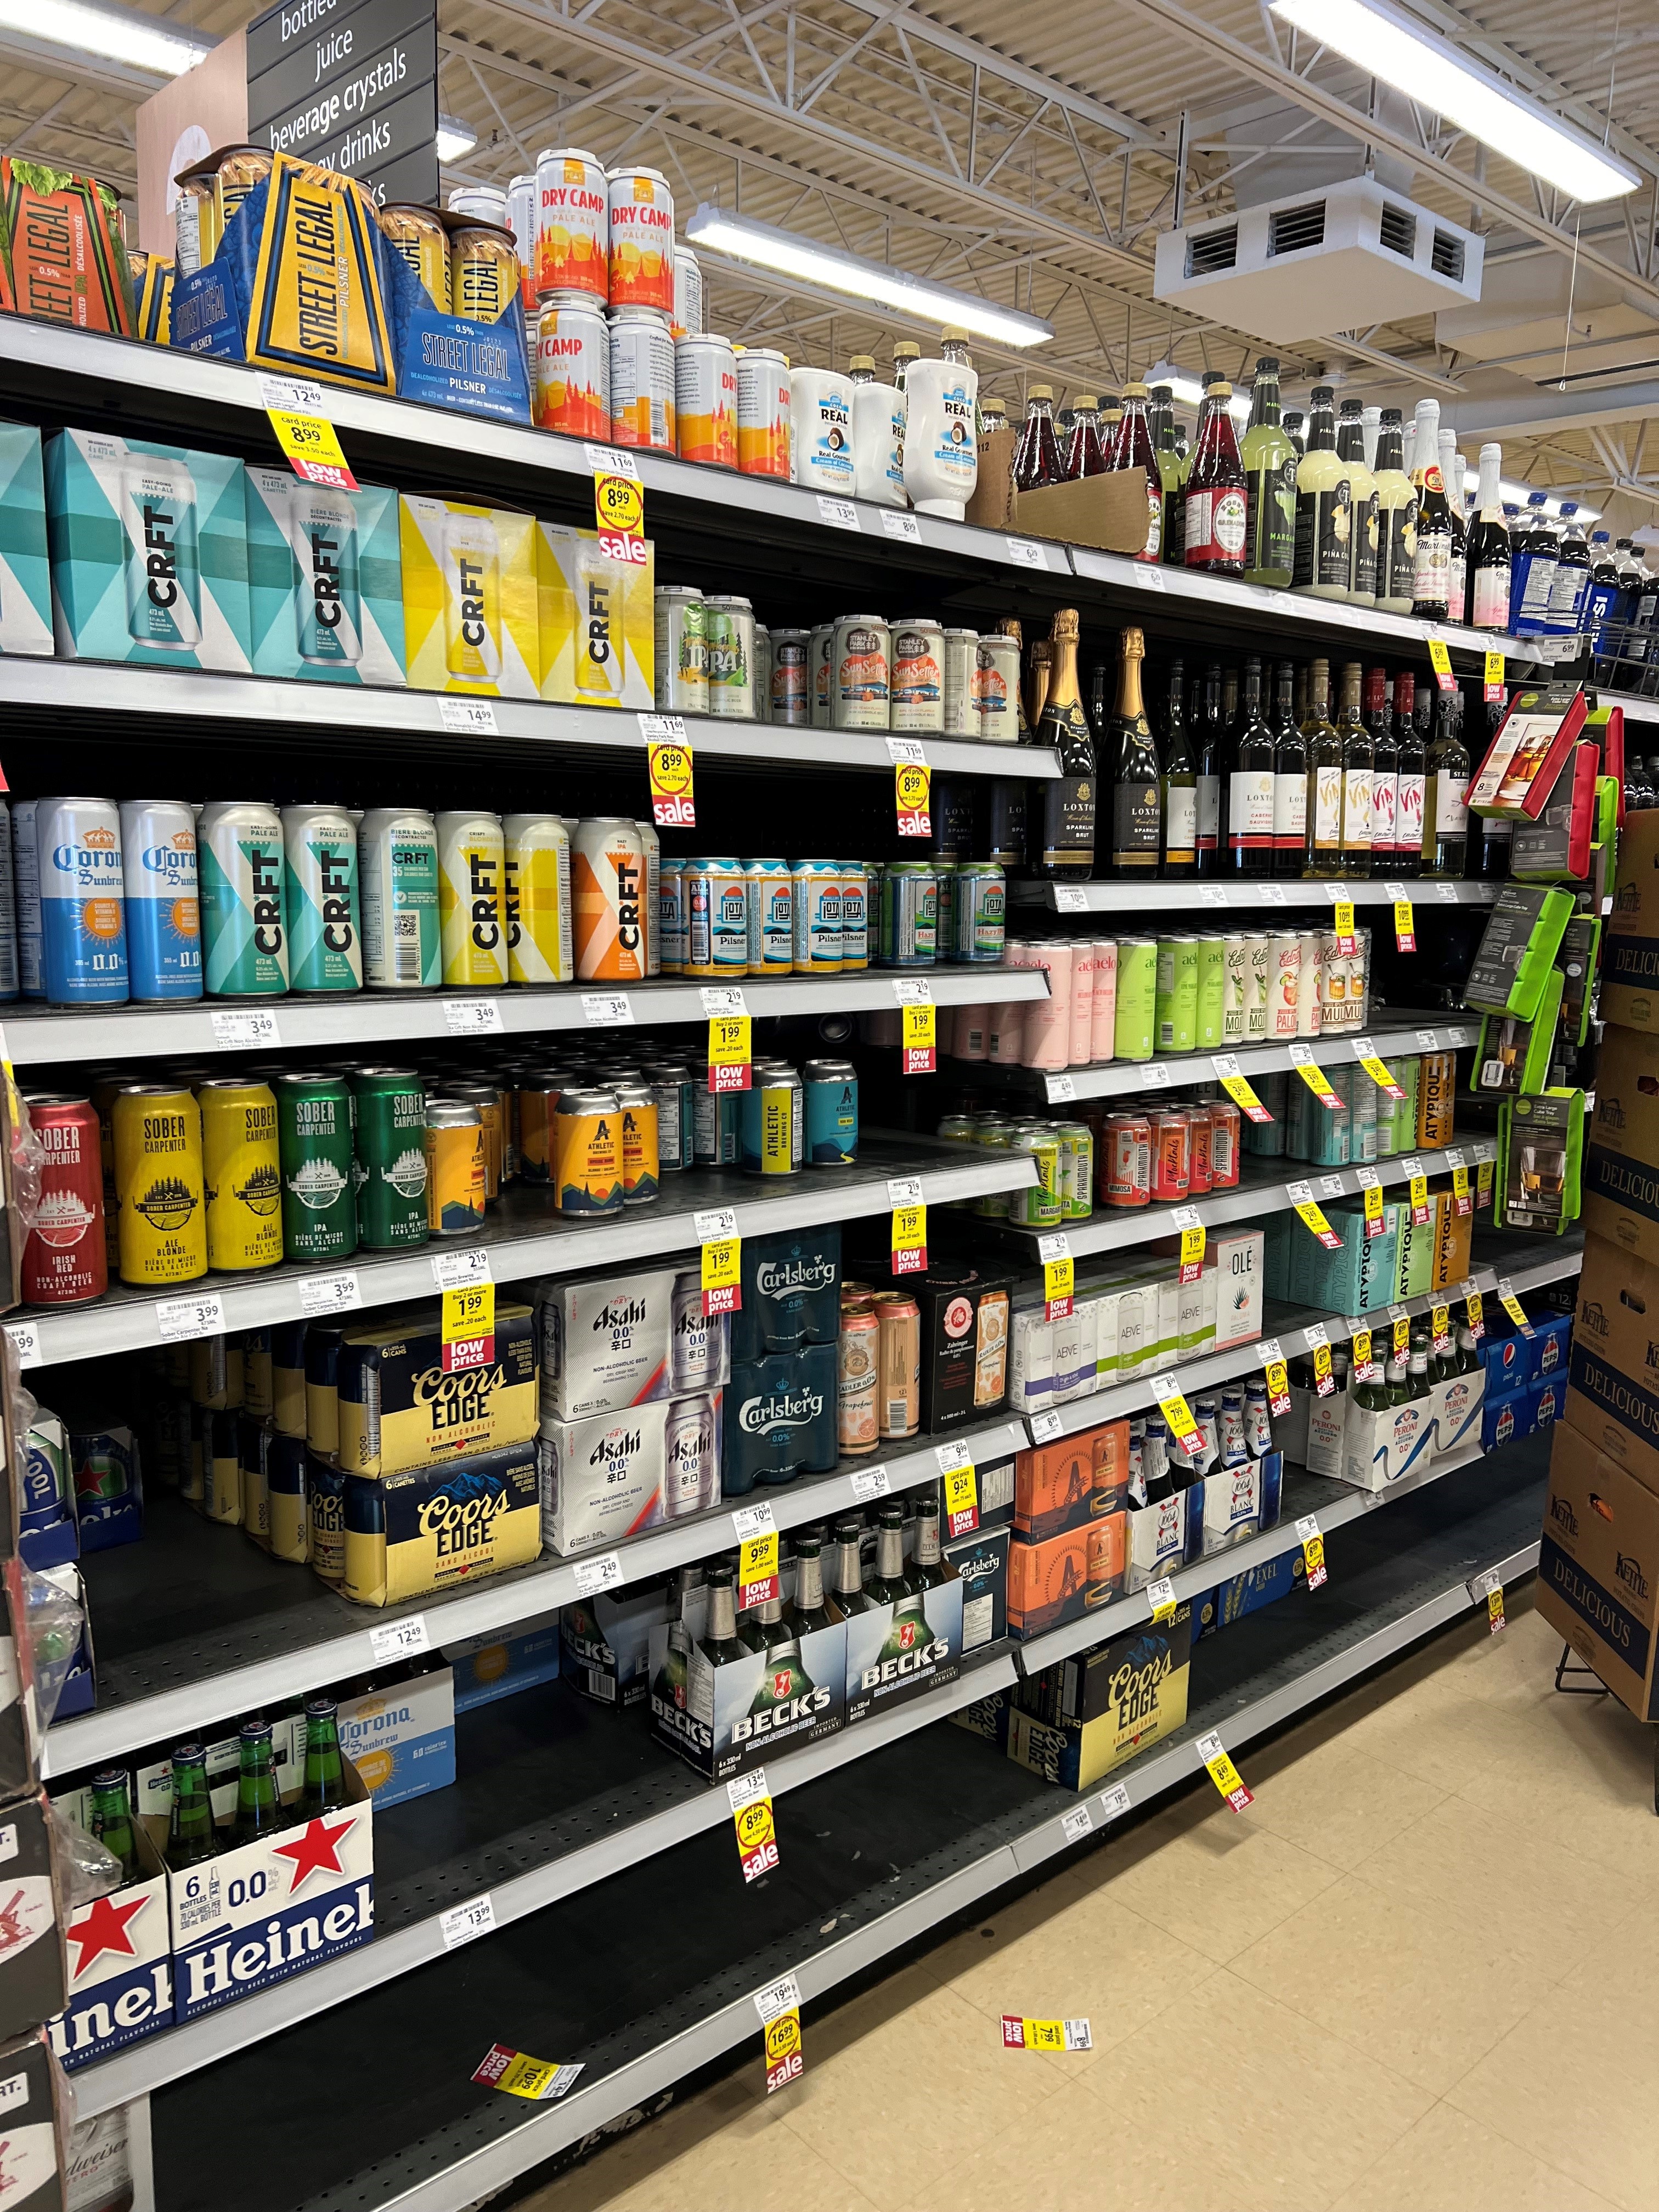 A shelf of beverages in cans and bottles at a grocery store